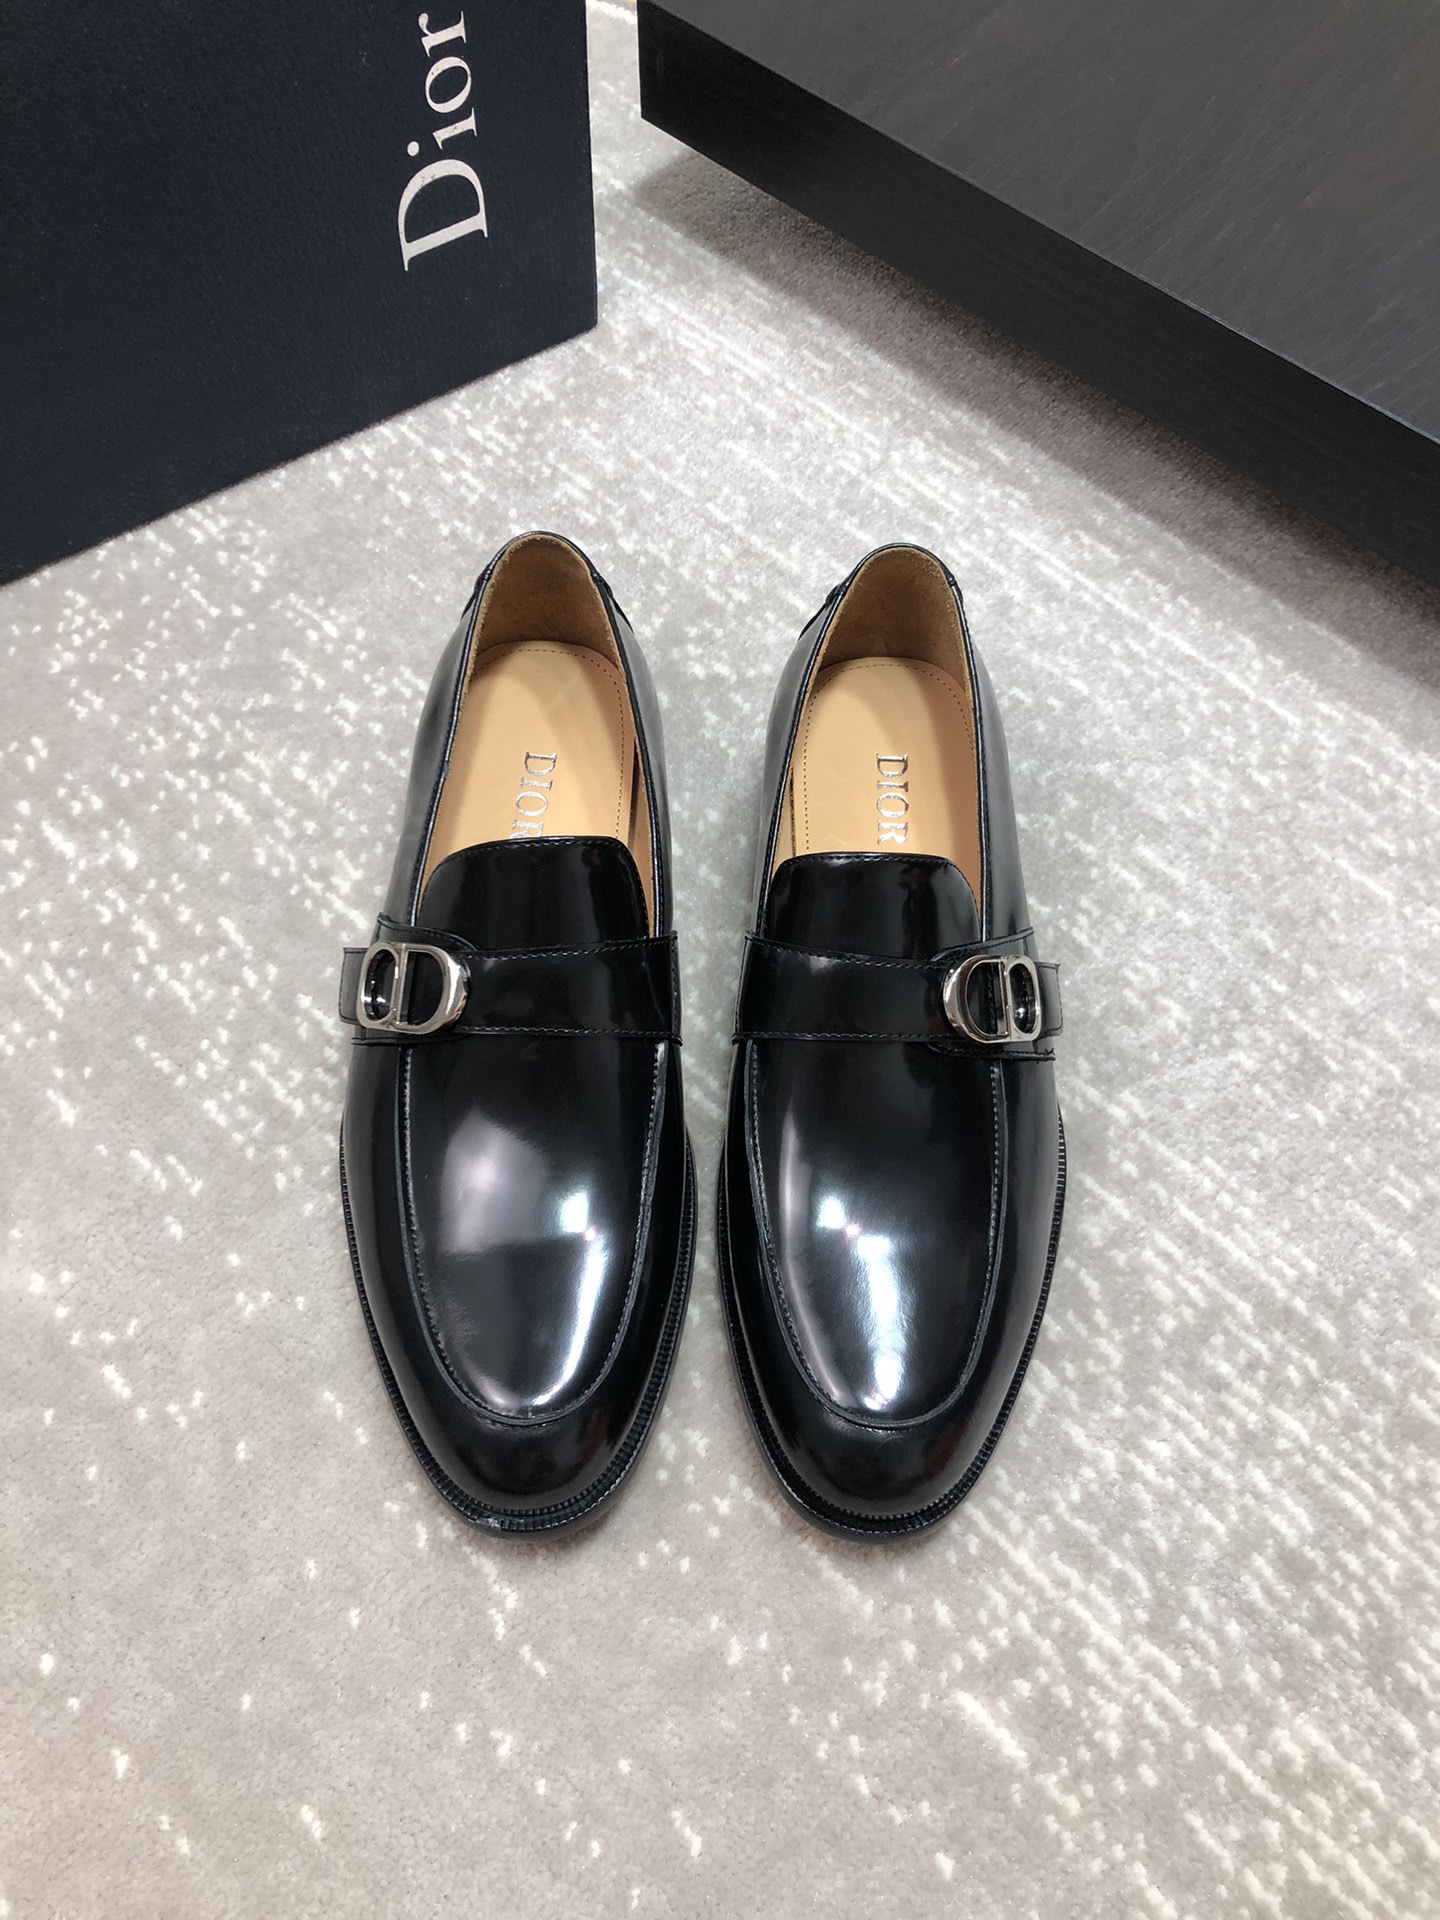 Dior Shoes Plain Toe Buy The Best Replica
 Cowhide Genuine Leather